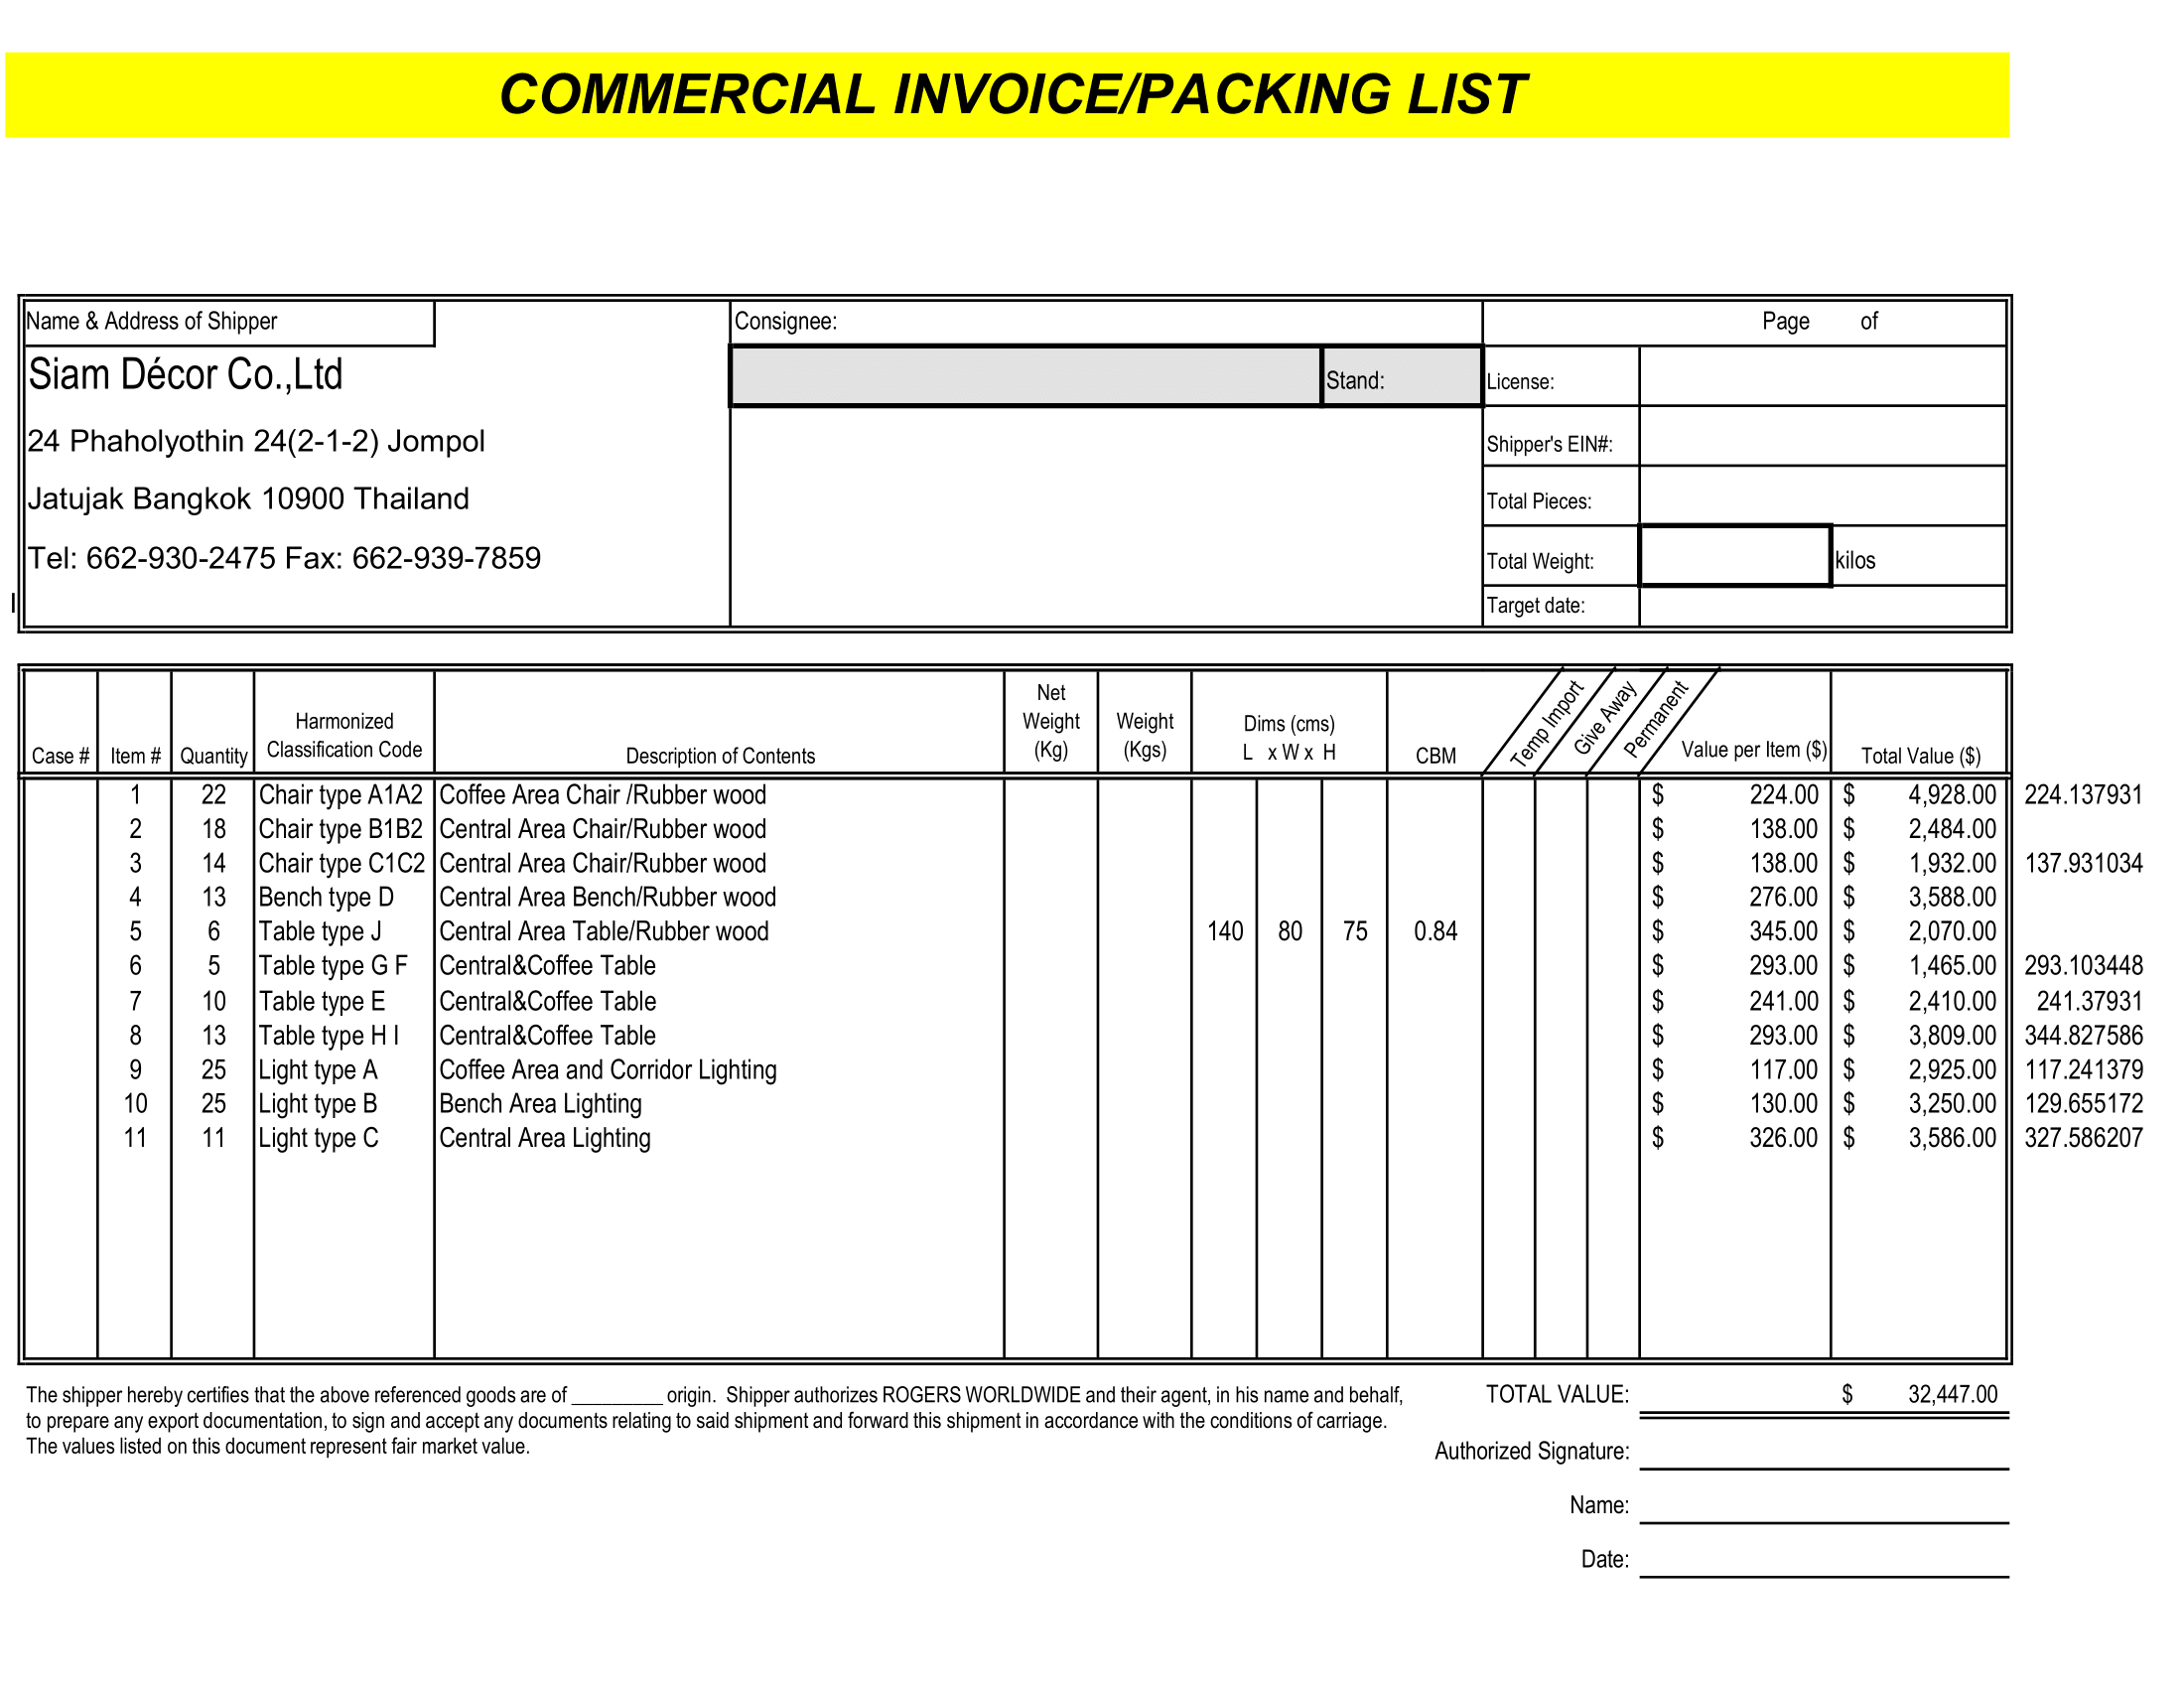 Commercial Invoice with Packaging list in excel by formatworks